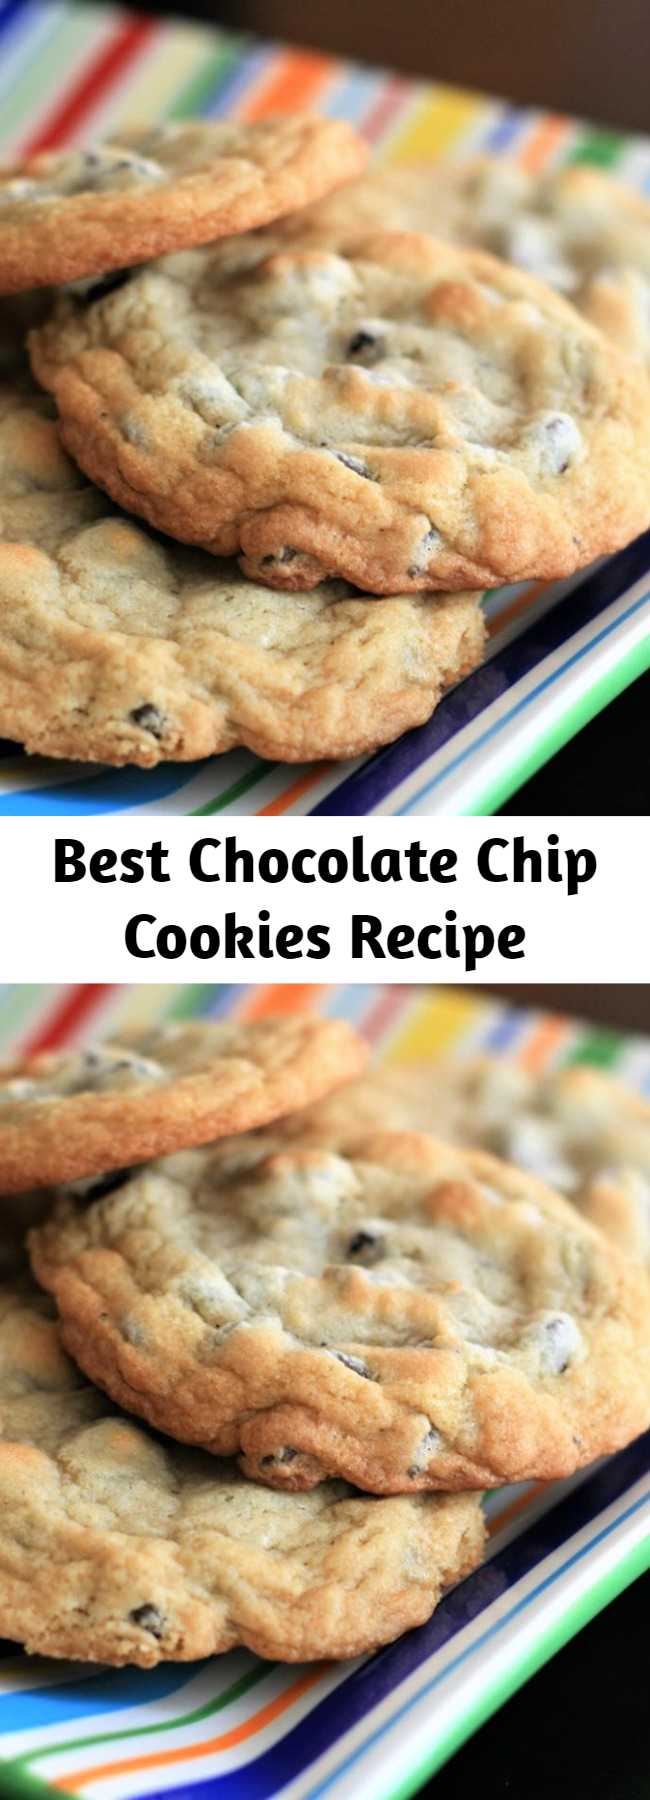 Best Chocolate Chip Cookies Recipe - This is the perfect chocolate chip cookie!! Crispy on the outside and chewy on the inside!!